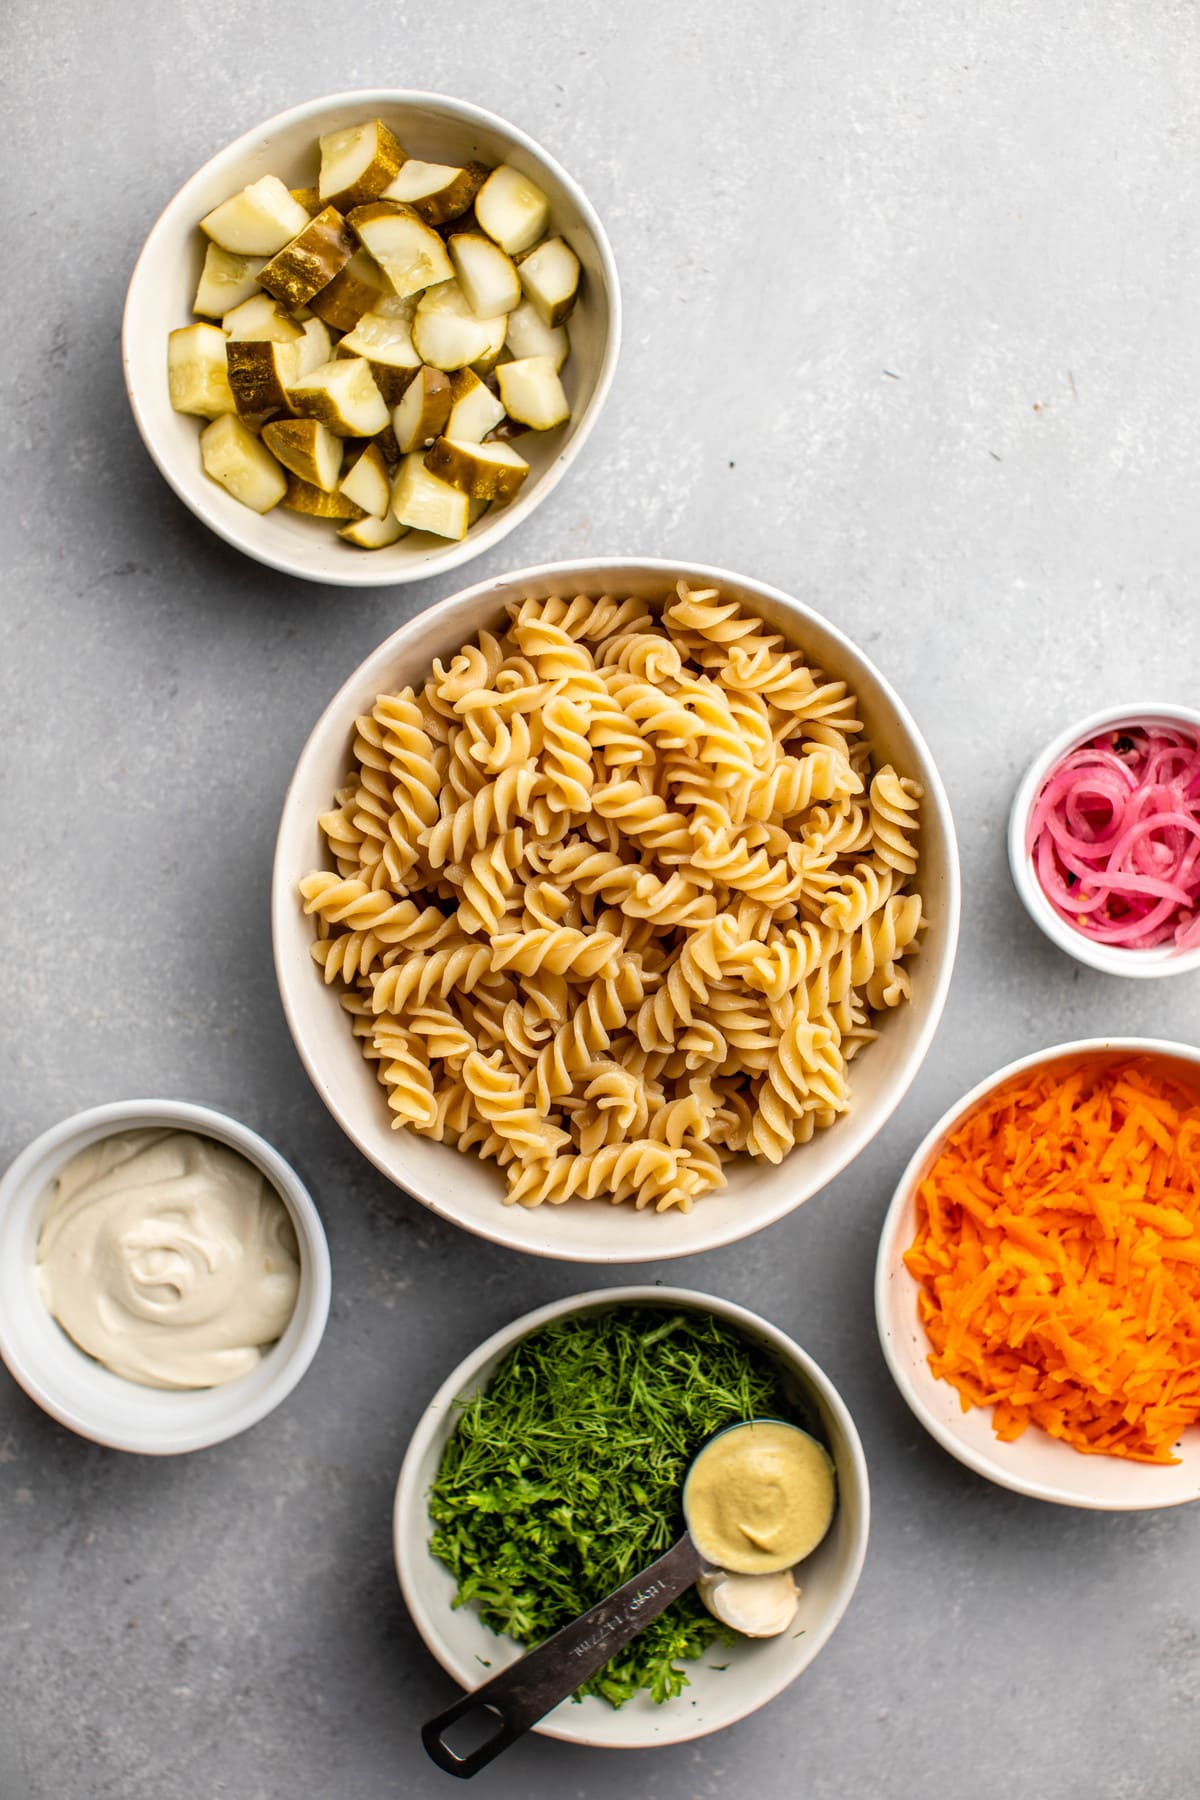 ingredients for dill pickle pasta salad in white bowls